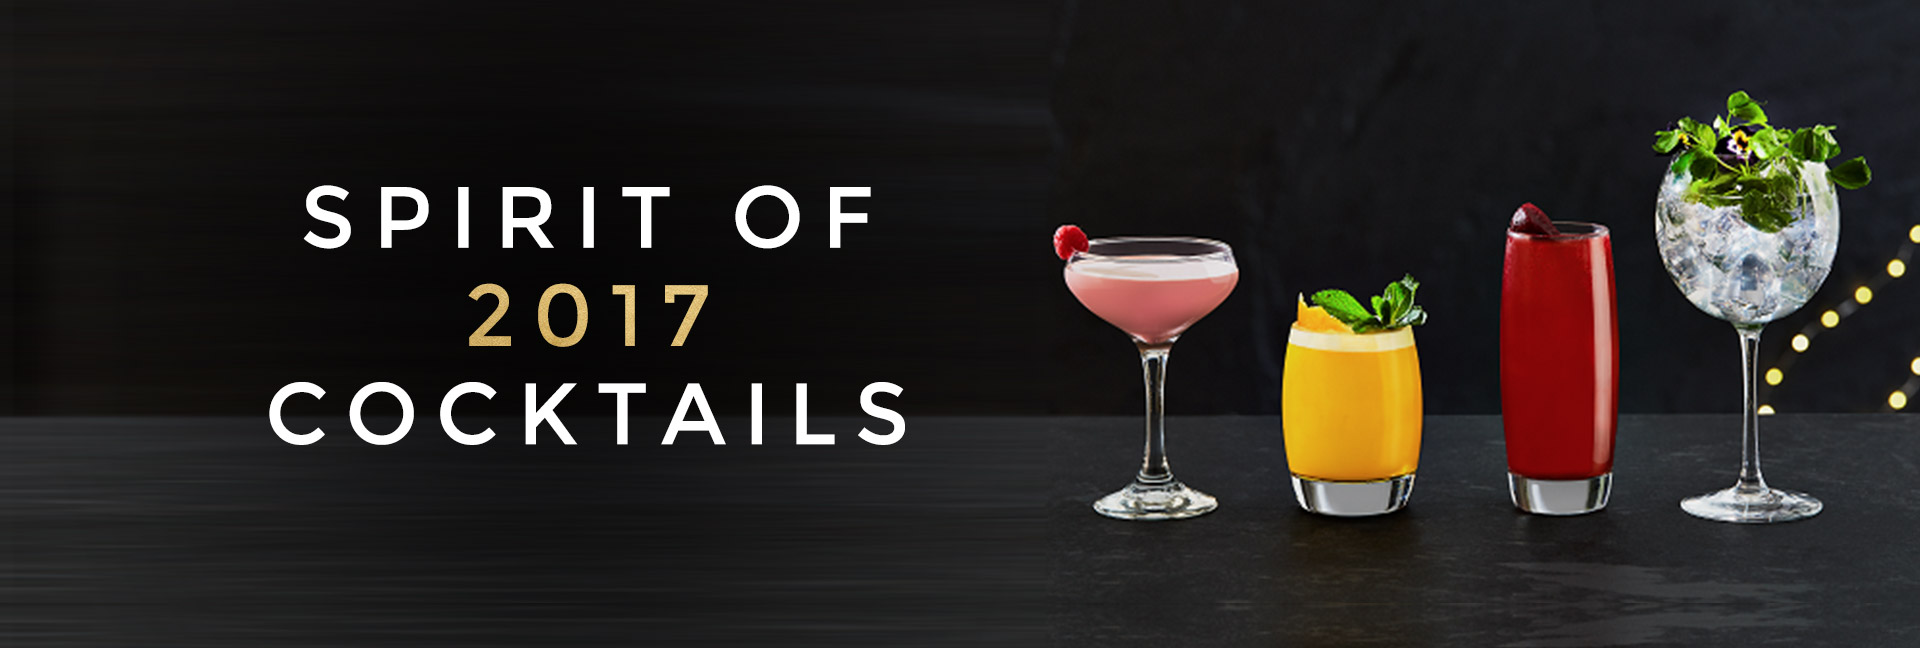 Spirit of 2017 cocktails at All Bar One Sheffield